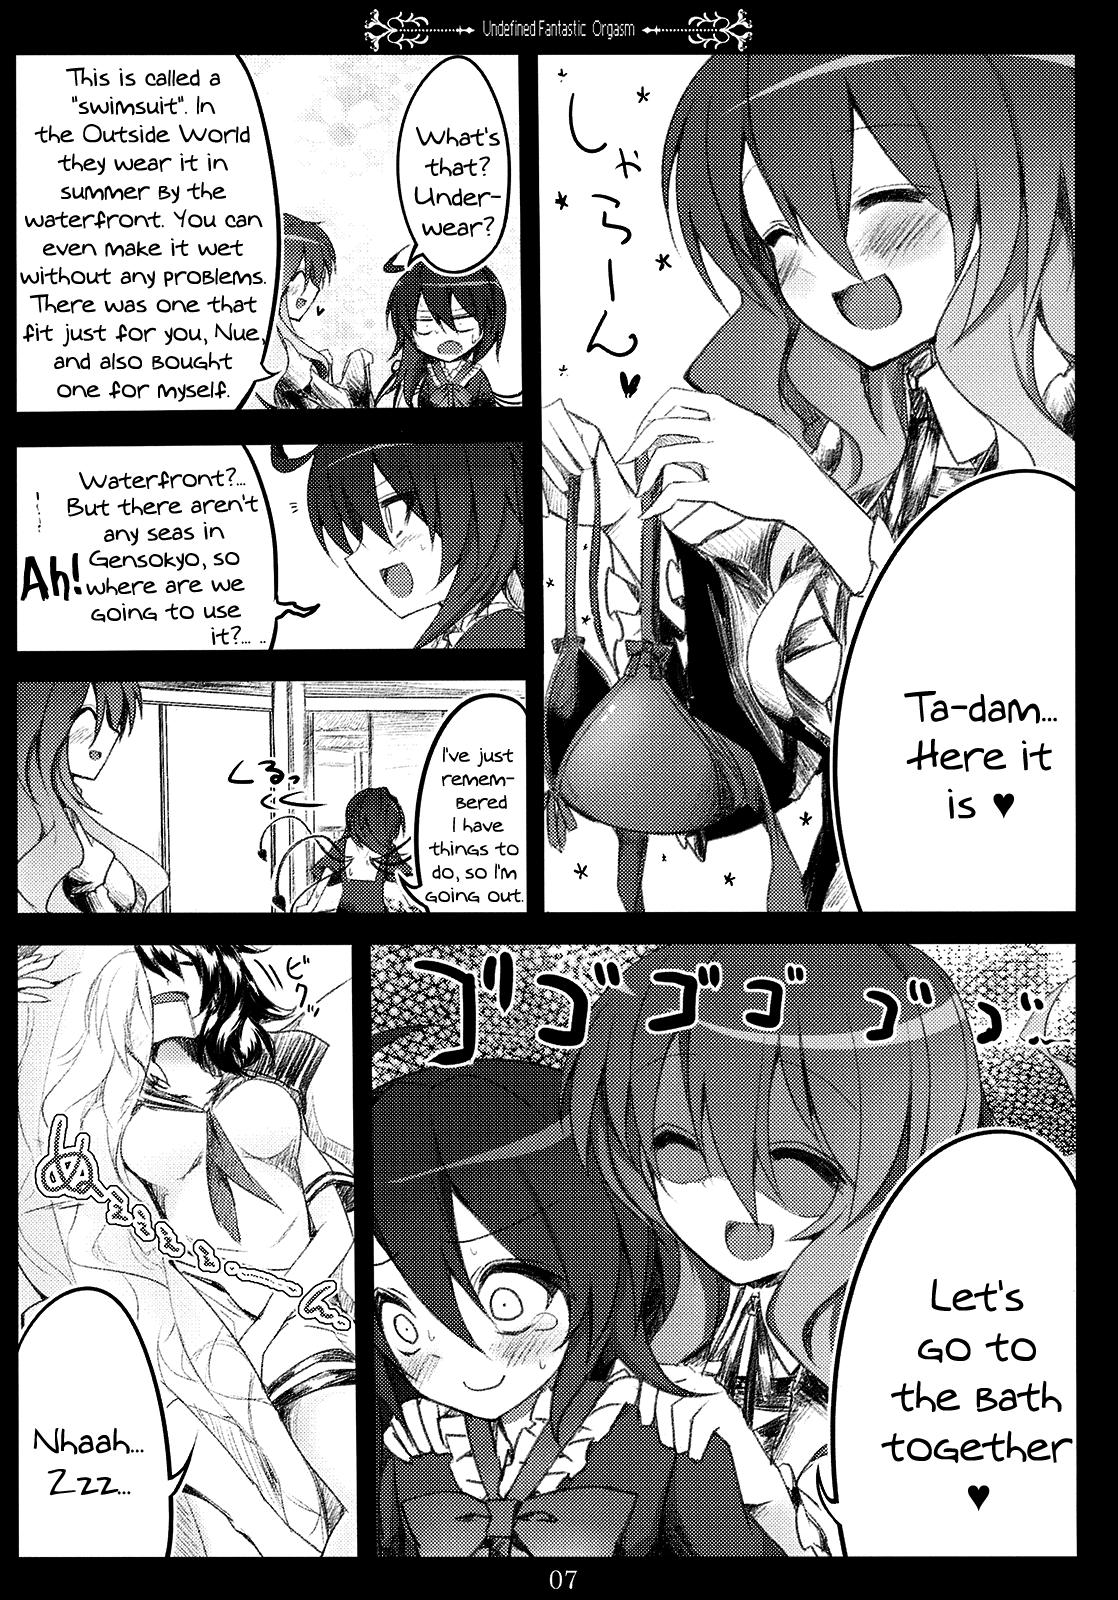 One Undefined Fantastic Orgasm - Touhou project Lesbo - Page 7